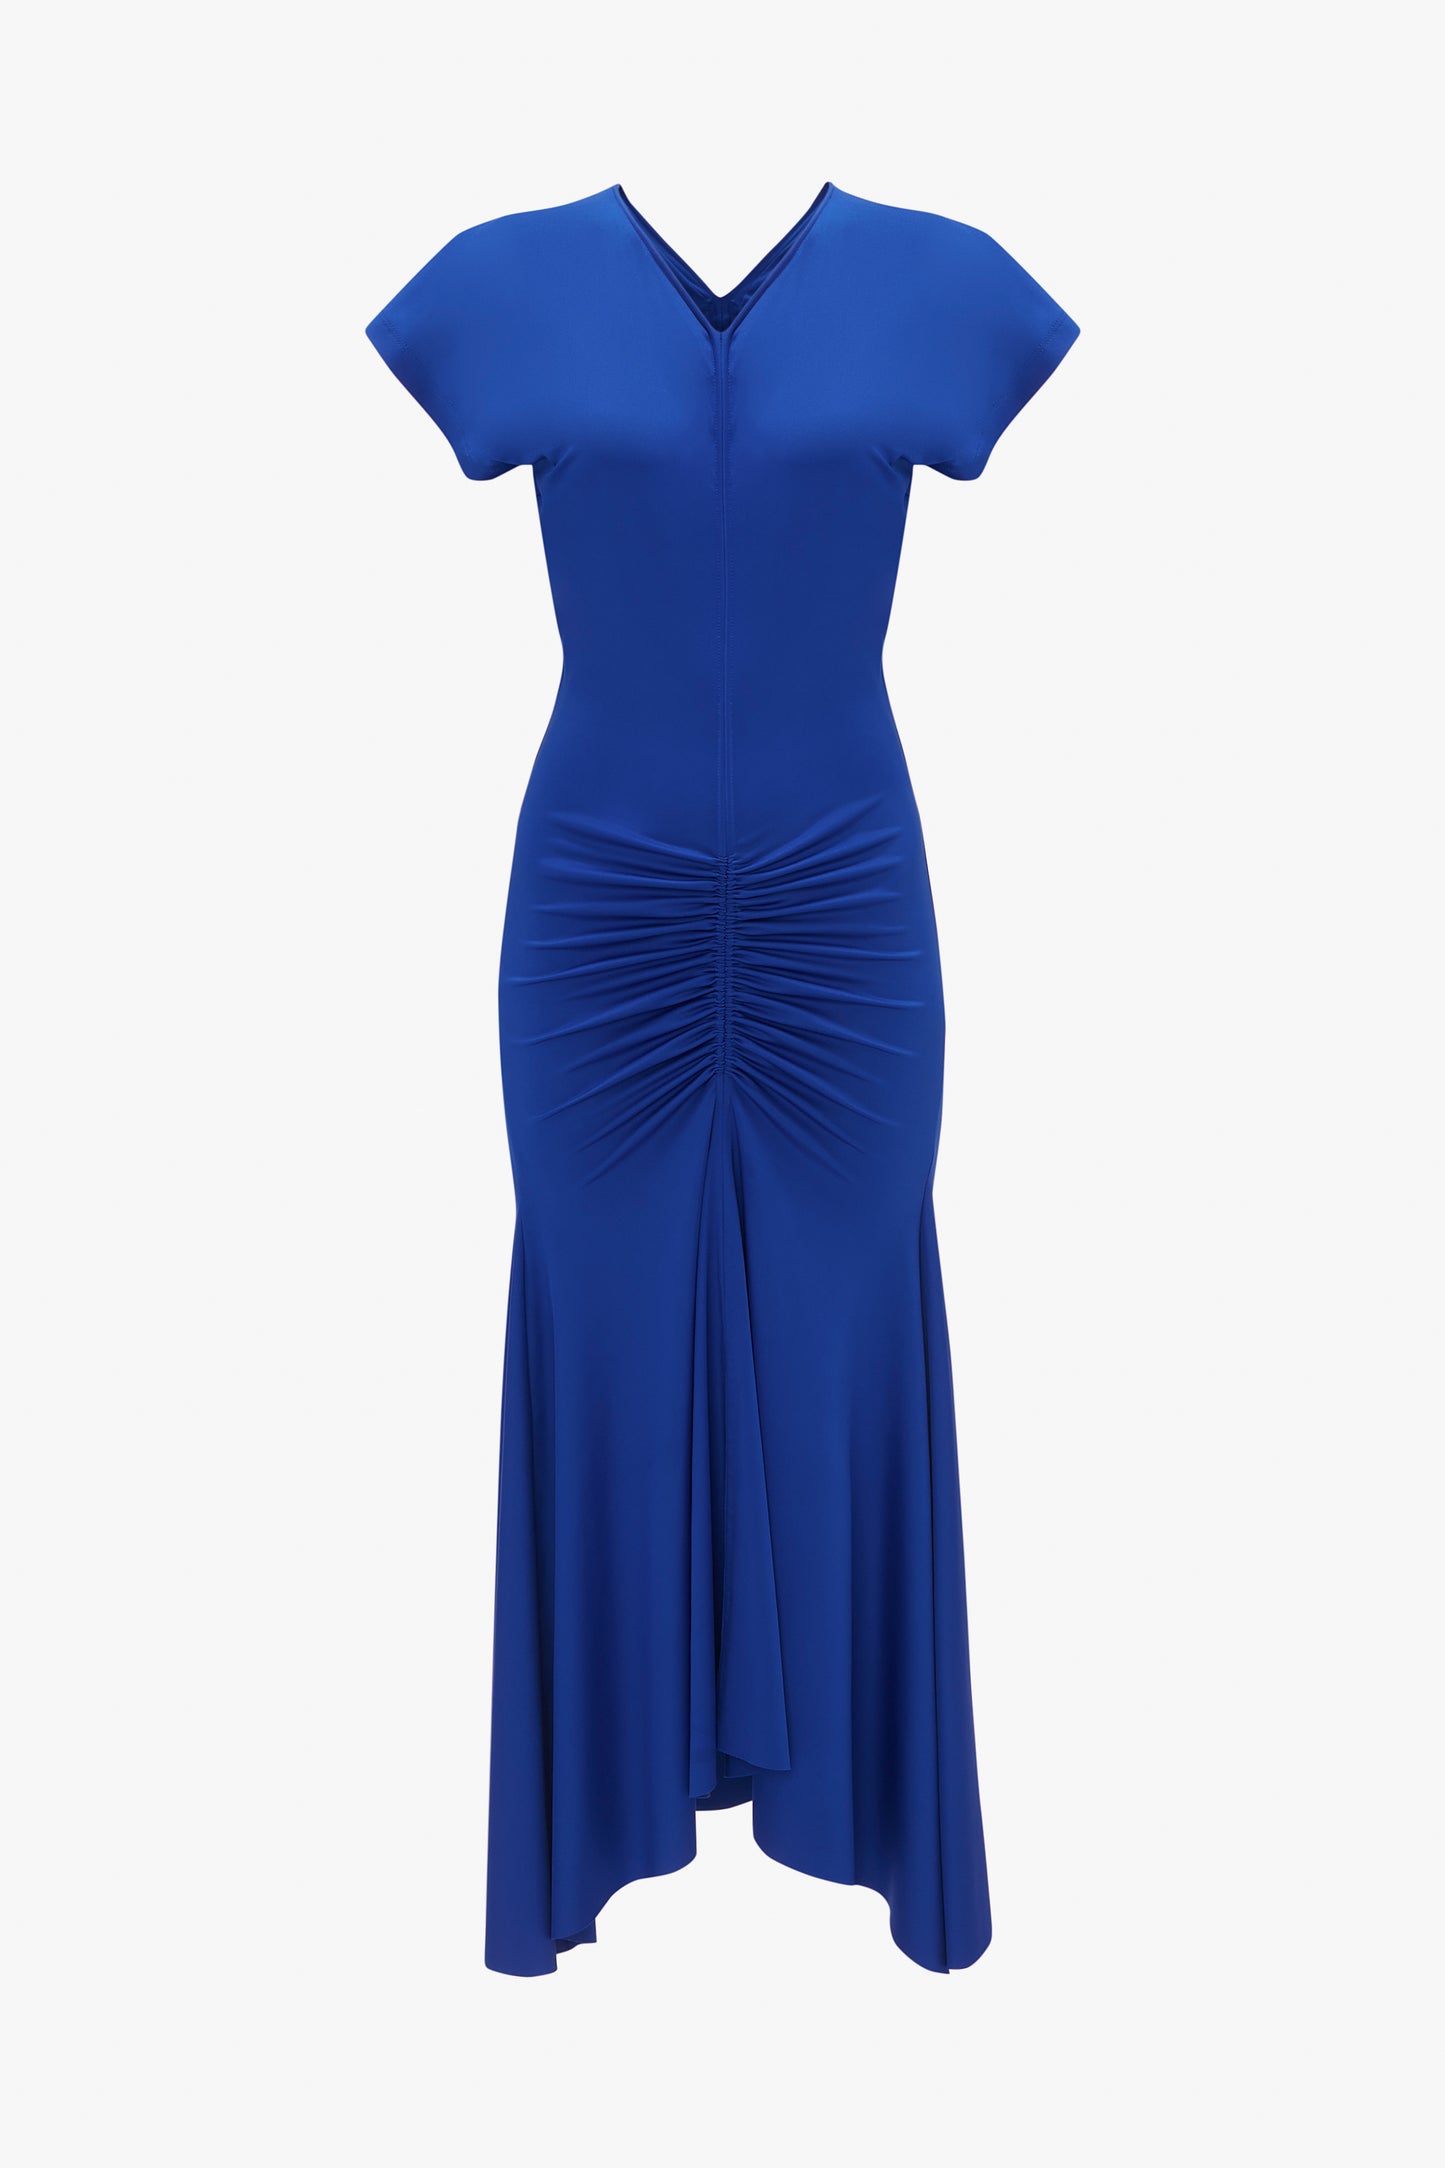 Victoria Beckham's sleeveless rouched jersey dress in royal blue, with a v-neckline and gathered detailing at the waist, displayed on a plain white background.